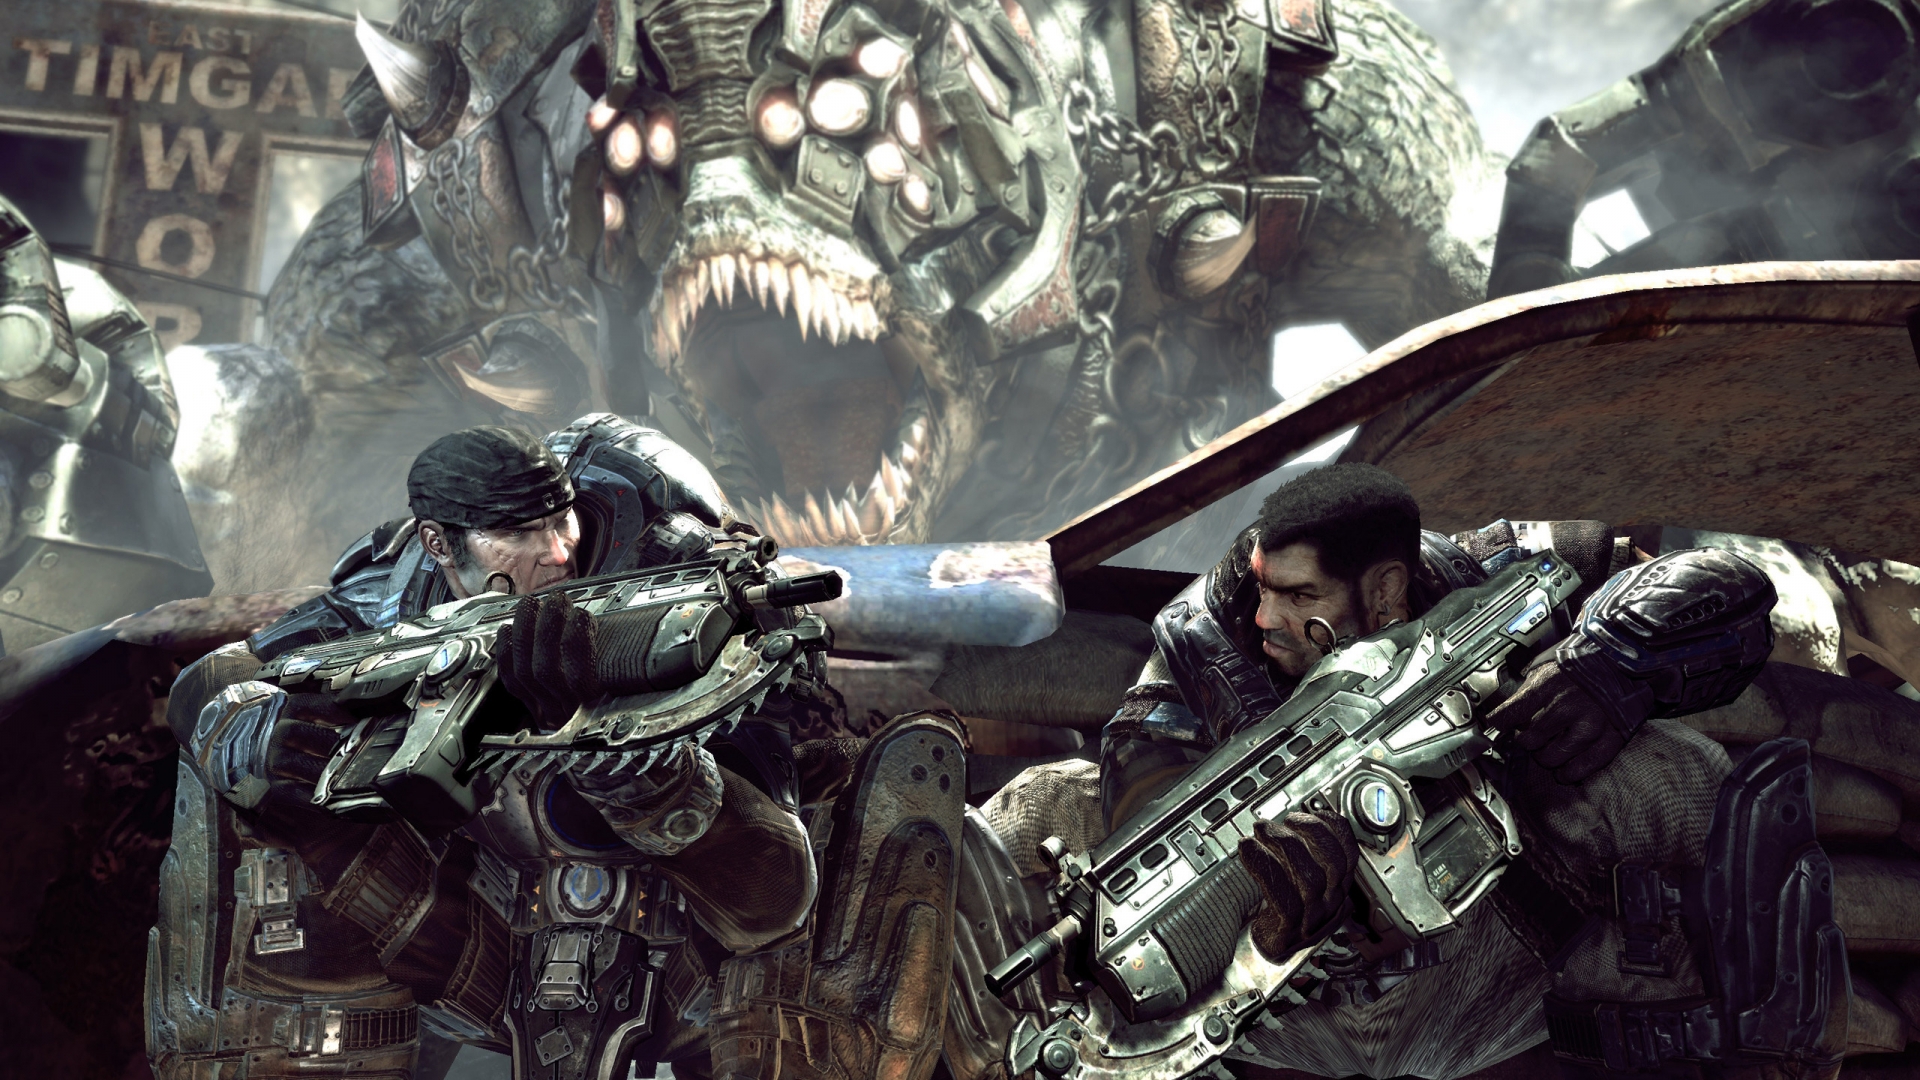 Gears of War for 1920 x 1080 HDTV 1080p resolution